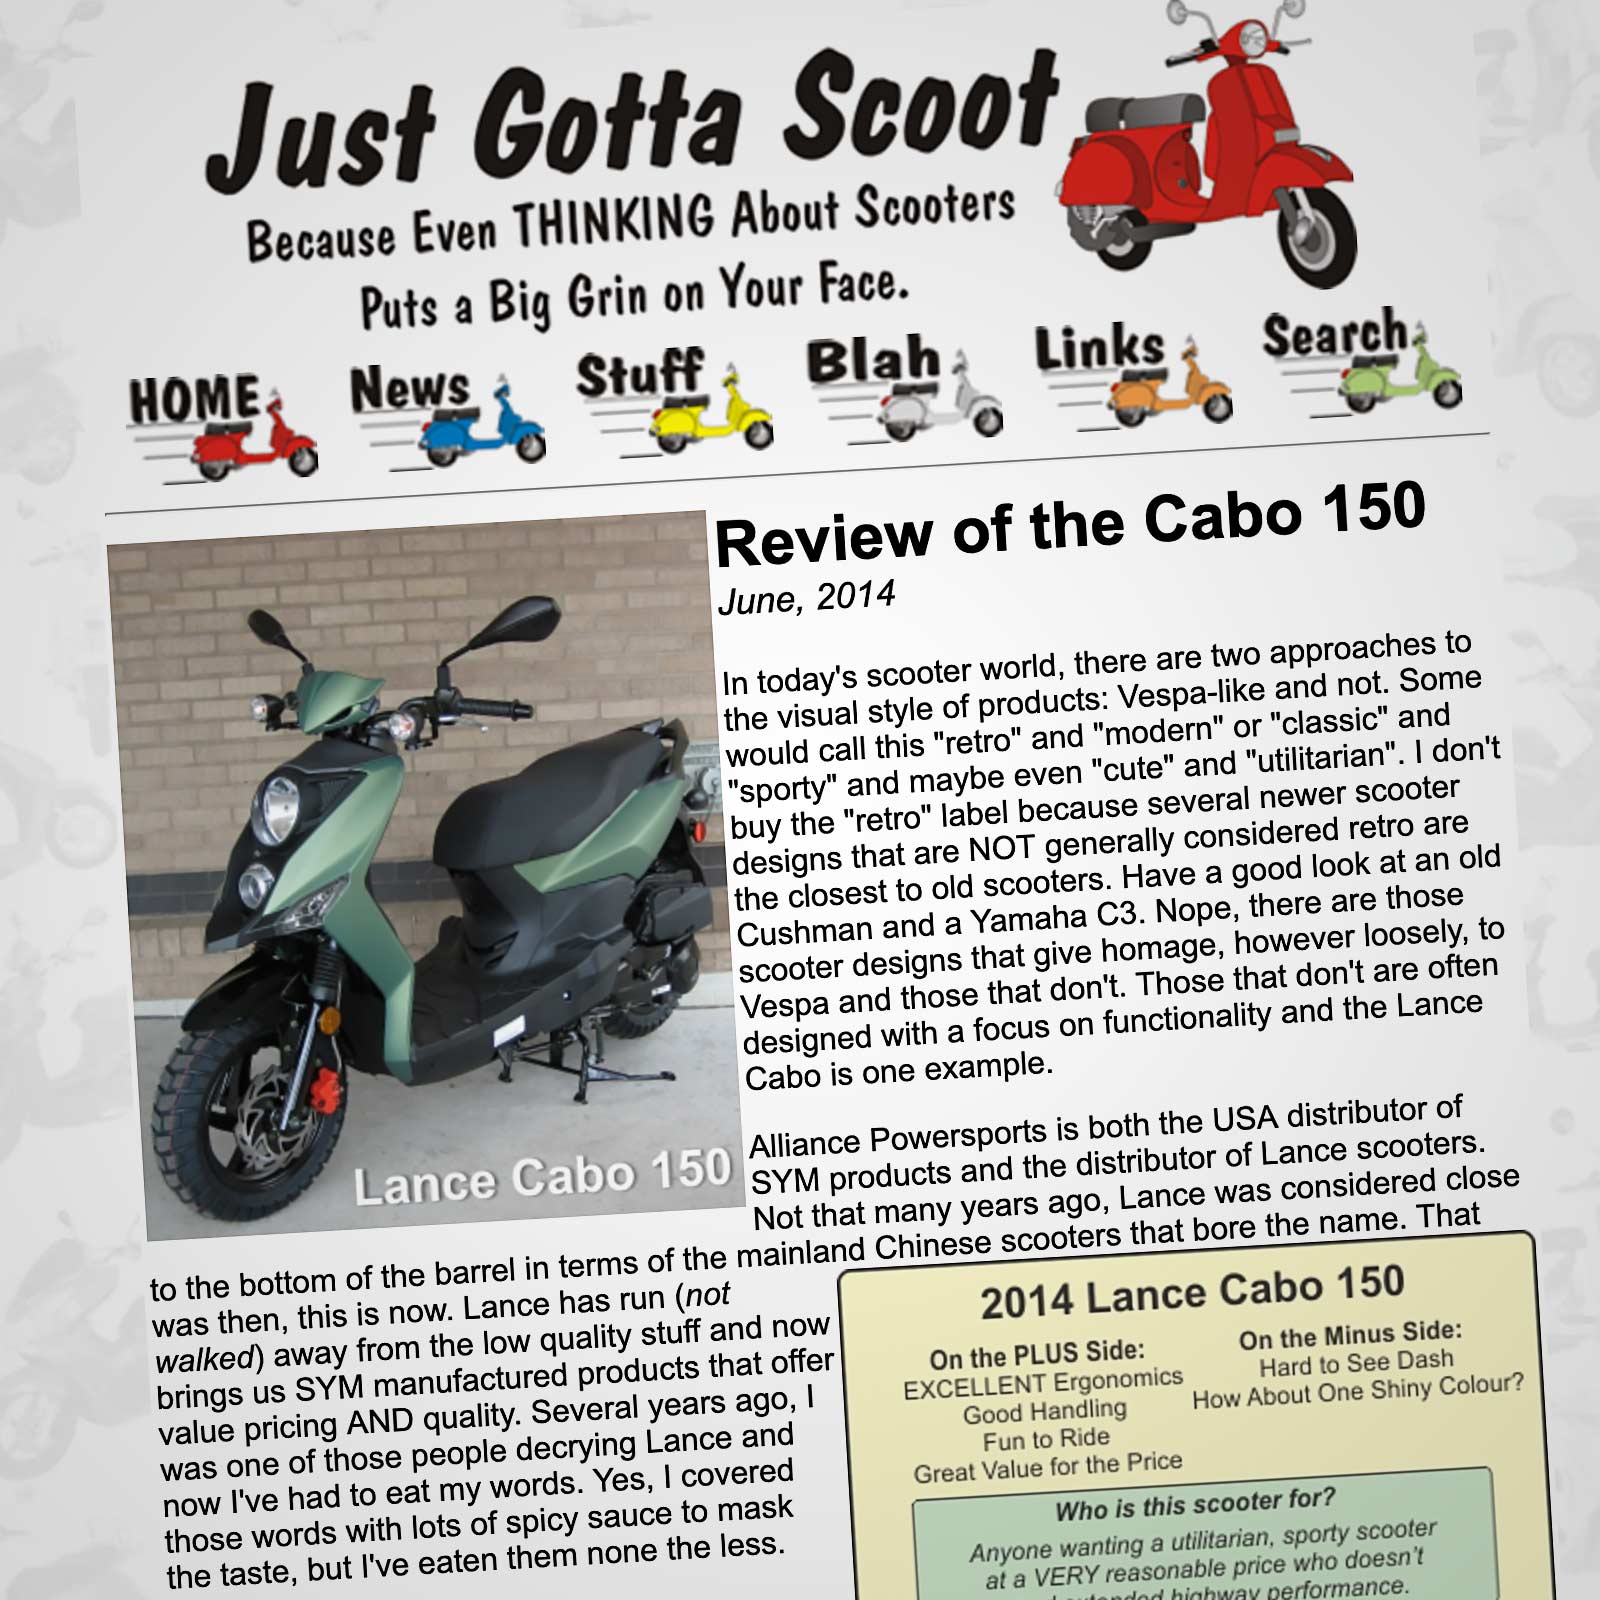 Lance Cabo 150 Scooter Review by Just Gotta Scoot!